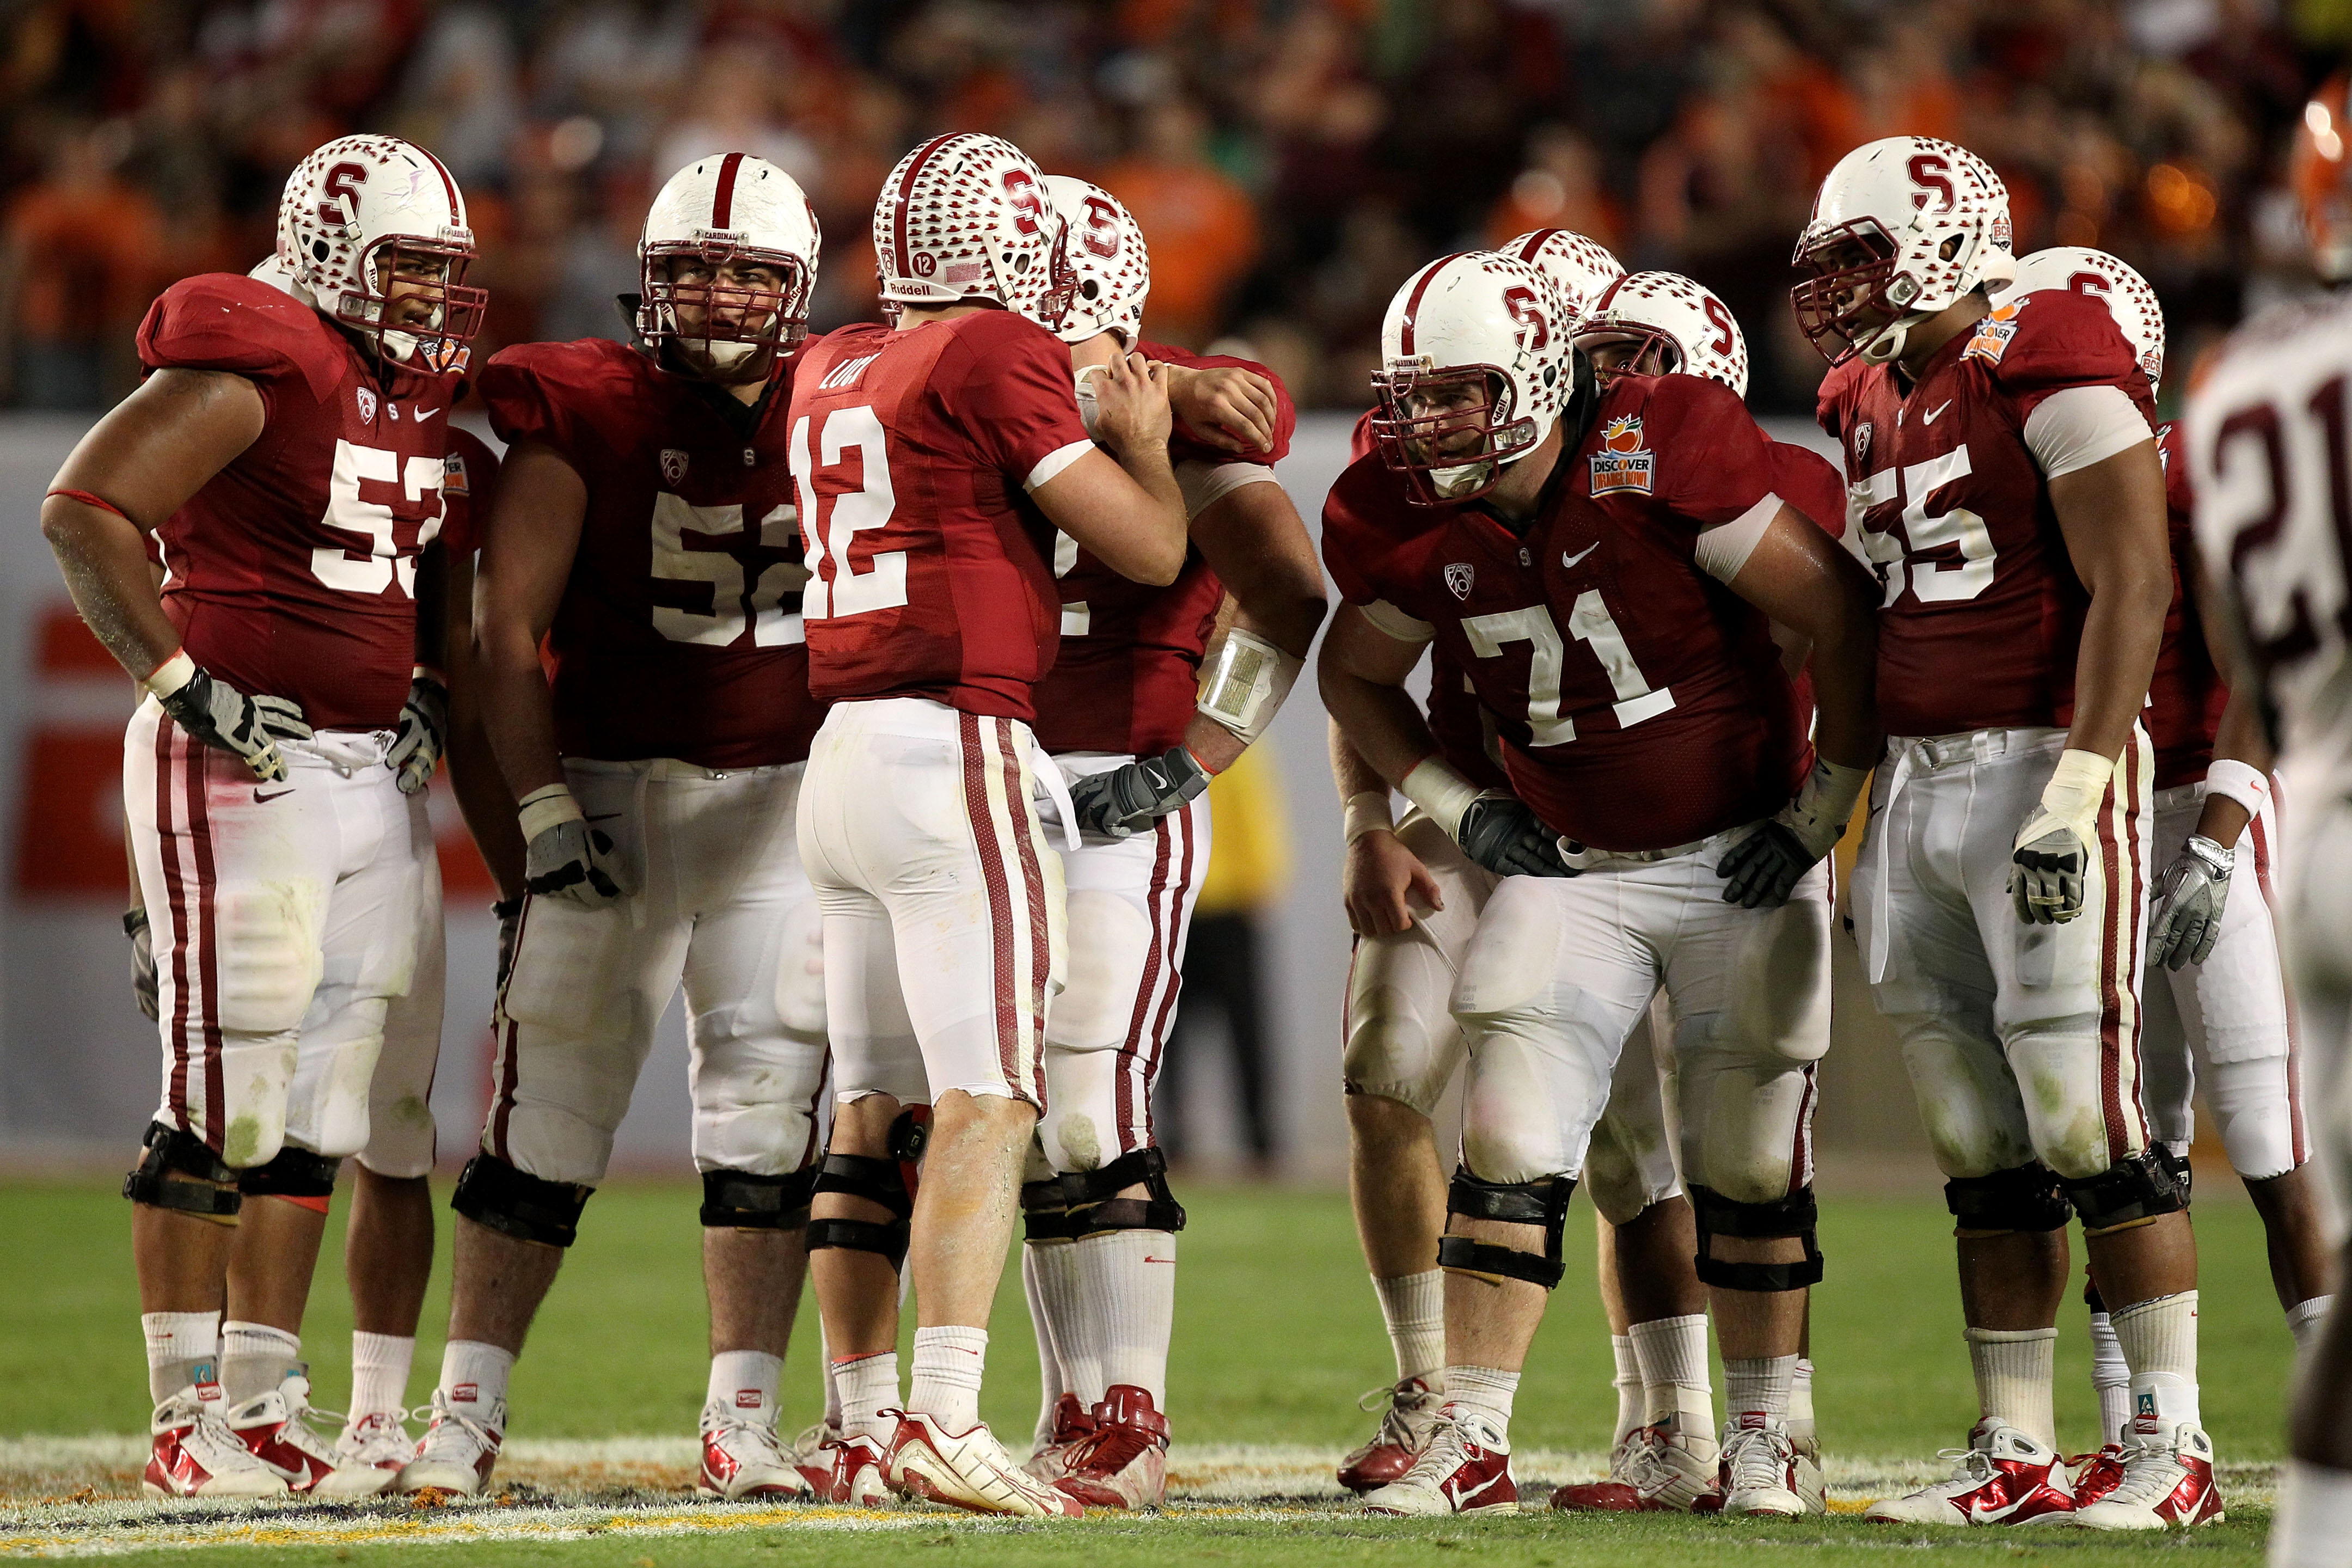 MIAMI, FL - JANUARY 03:  Quarterback Andrew Luck #12 of the Stanford Cardinal calls a play in the huddle as Derek Hall #53, David DeCastro #52, Andrew Phillips #71 and Jonathan Martin #55 listen to the call against the Virginai Tech Hokies during the 2011